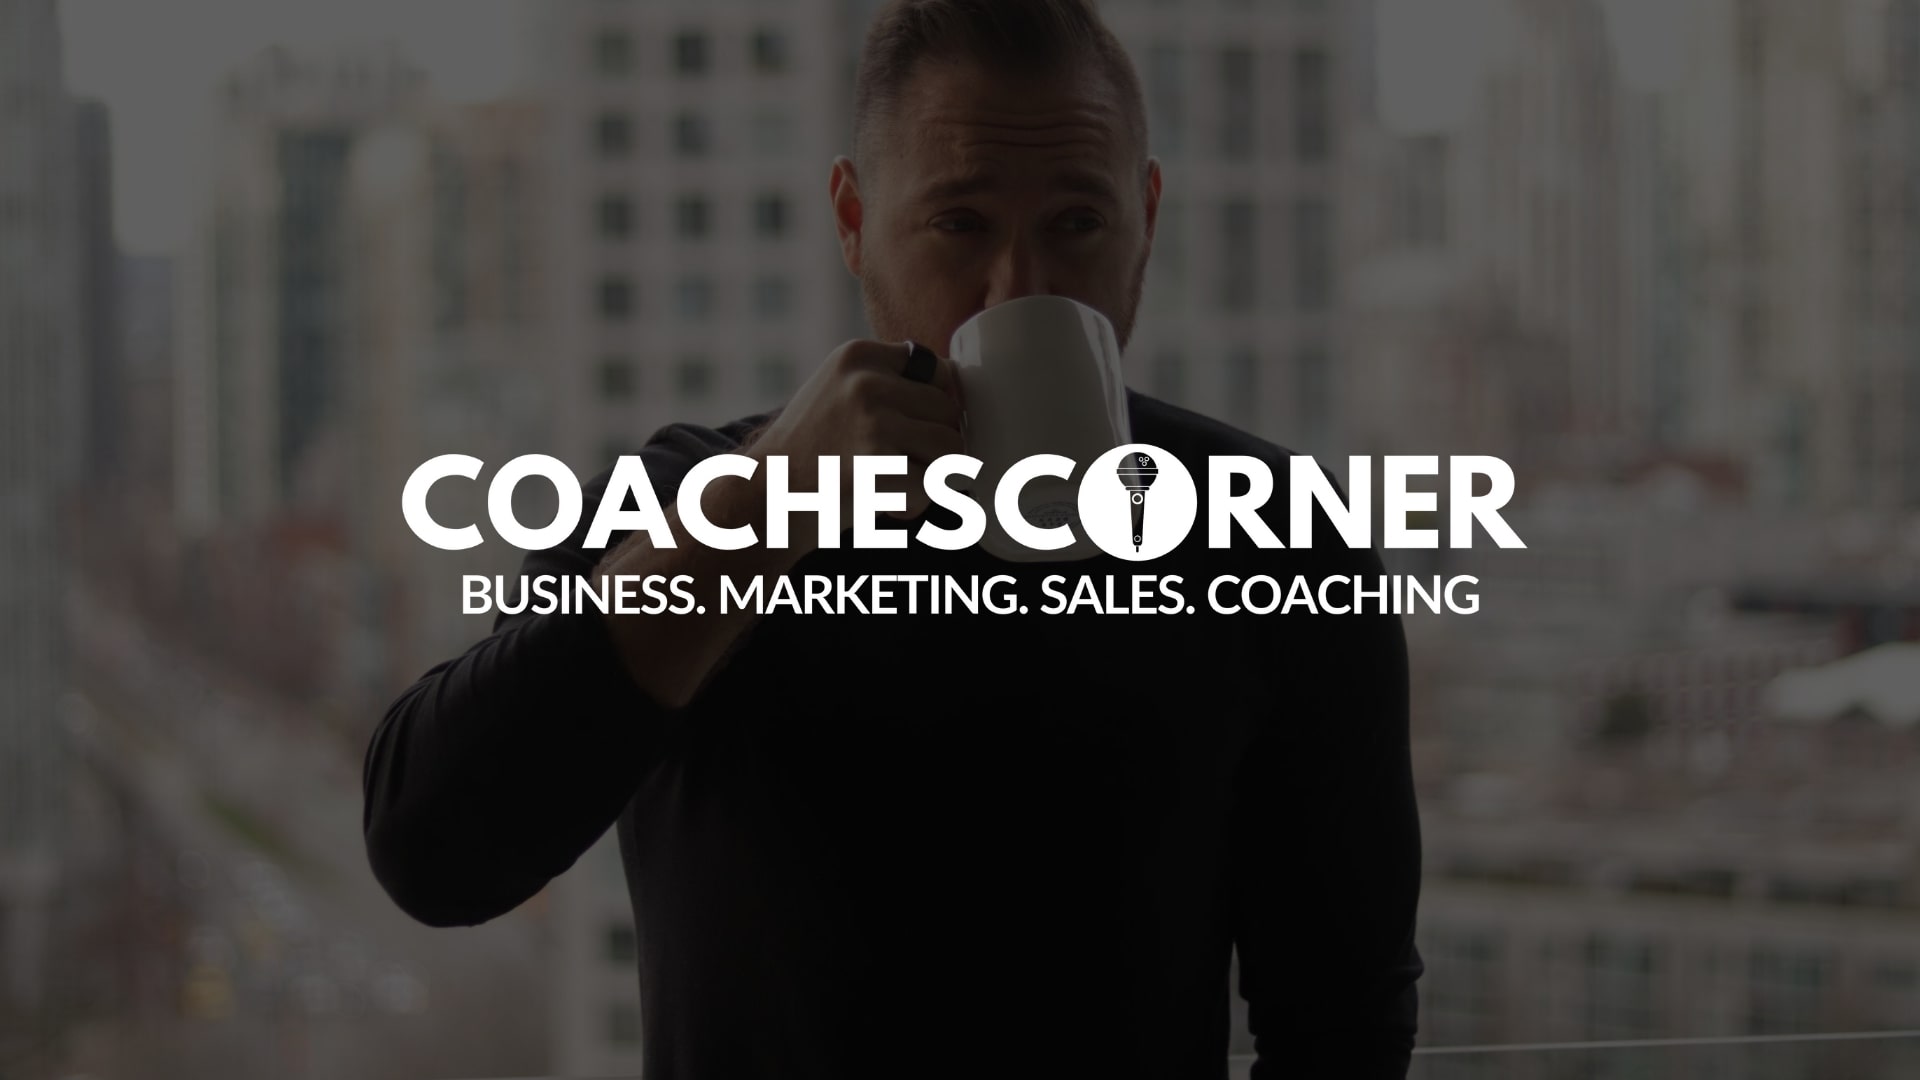 The Coaches Corner Podcast with Lucas Rubix - Build an online coaching business you love